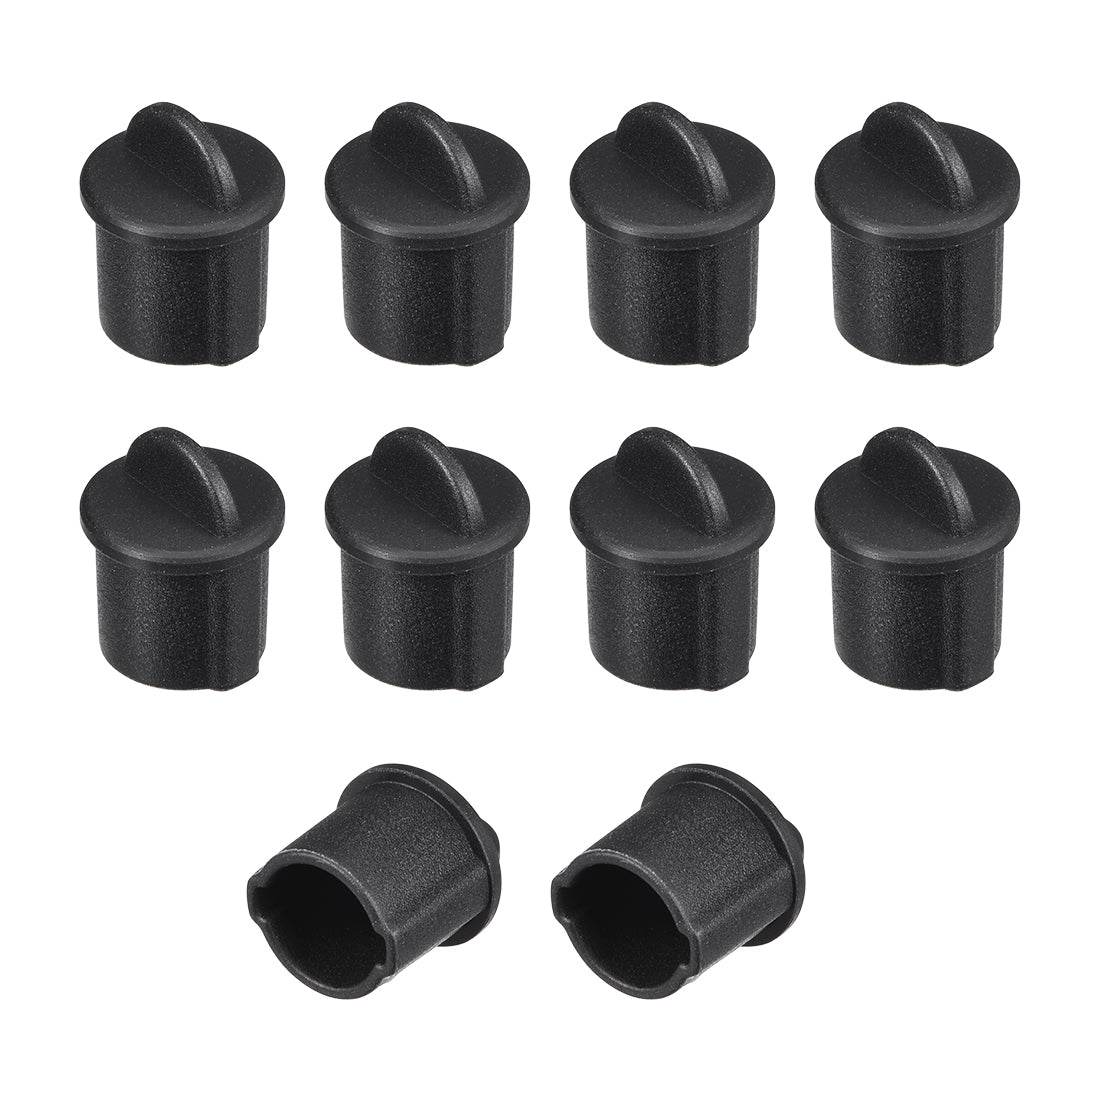 uxcell Uxcell Silicone BNC Anti-Dust Stopper Cap Cover for Female Jack Black 10pcs